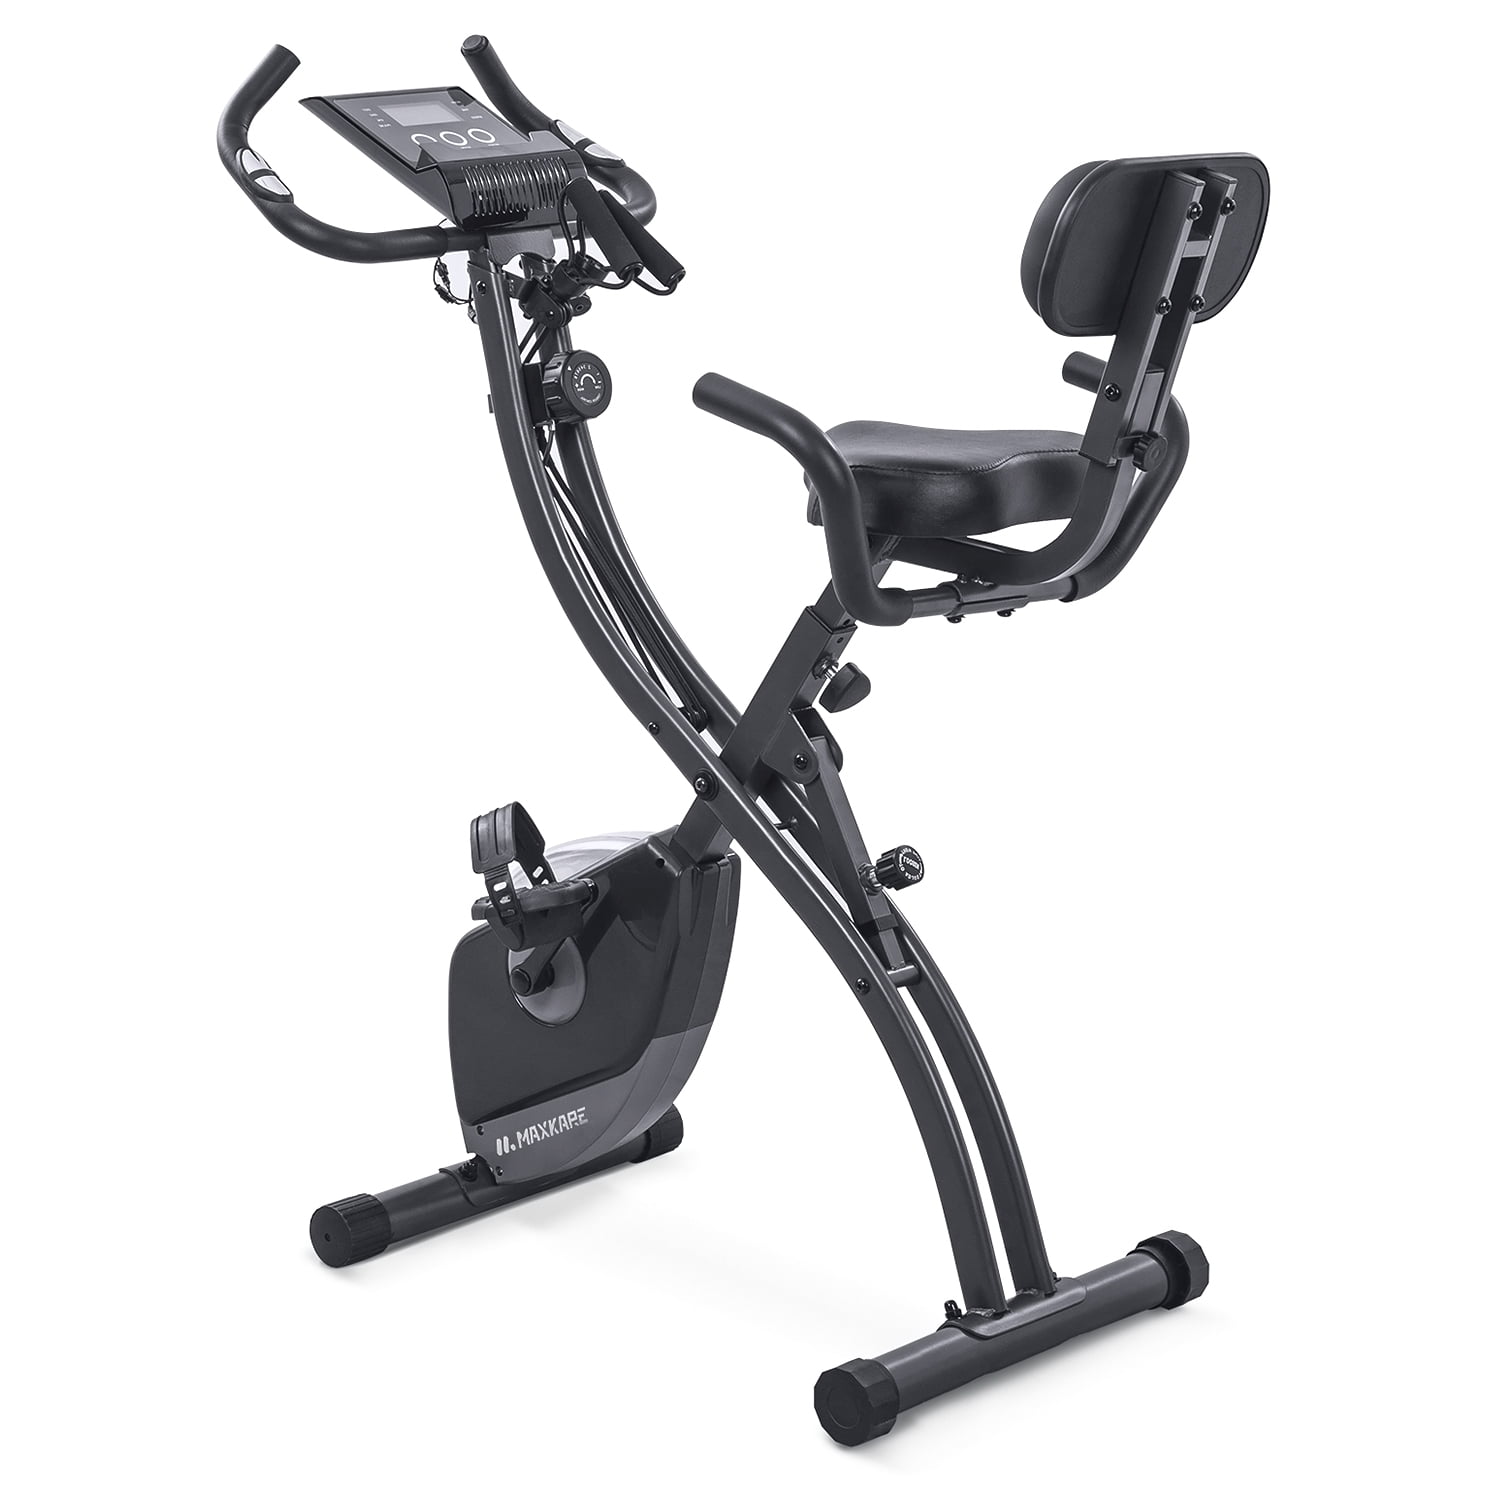 Details about   NEW Indoor Exercise Slim Folding Bike 3-in-1 Home Stationary Magnetic Cycle. 